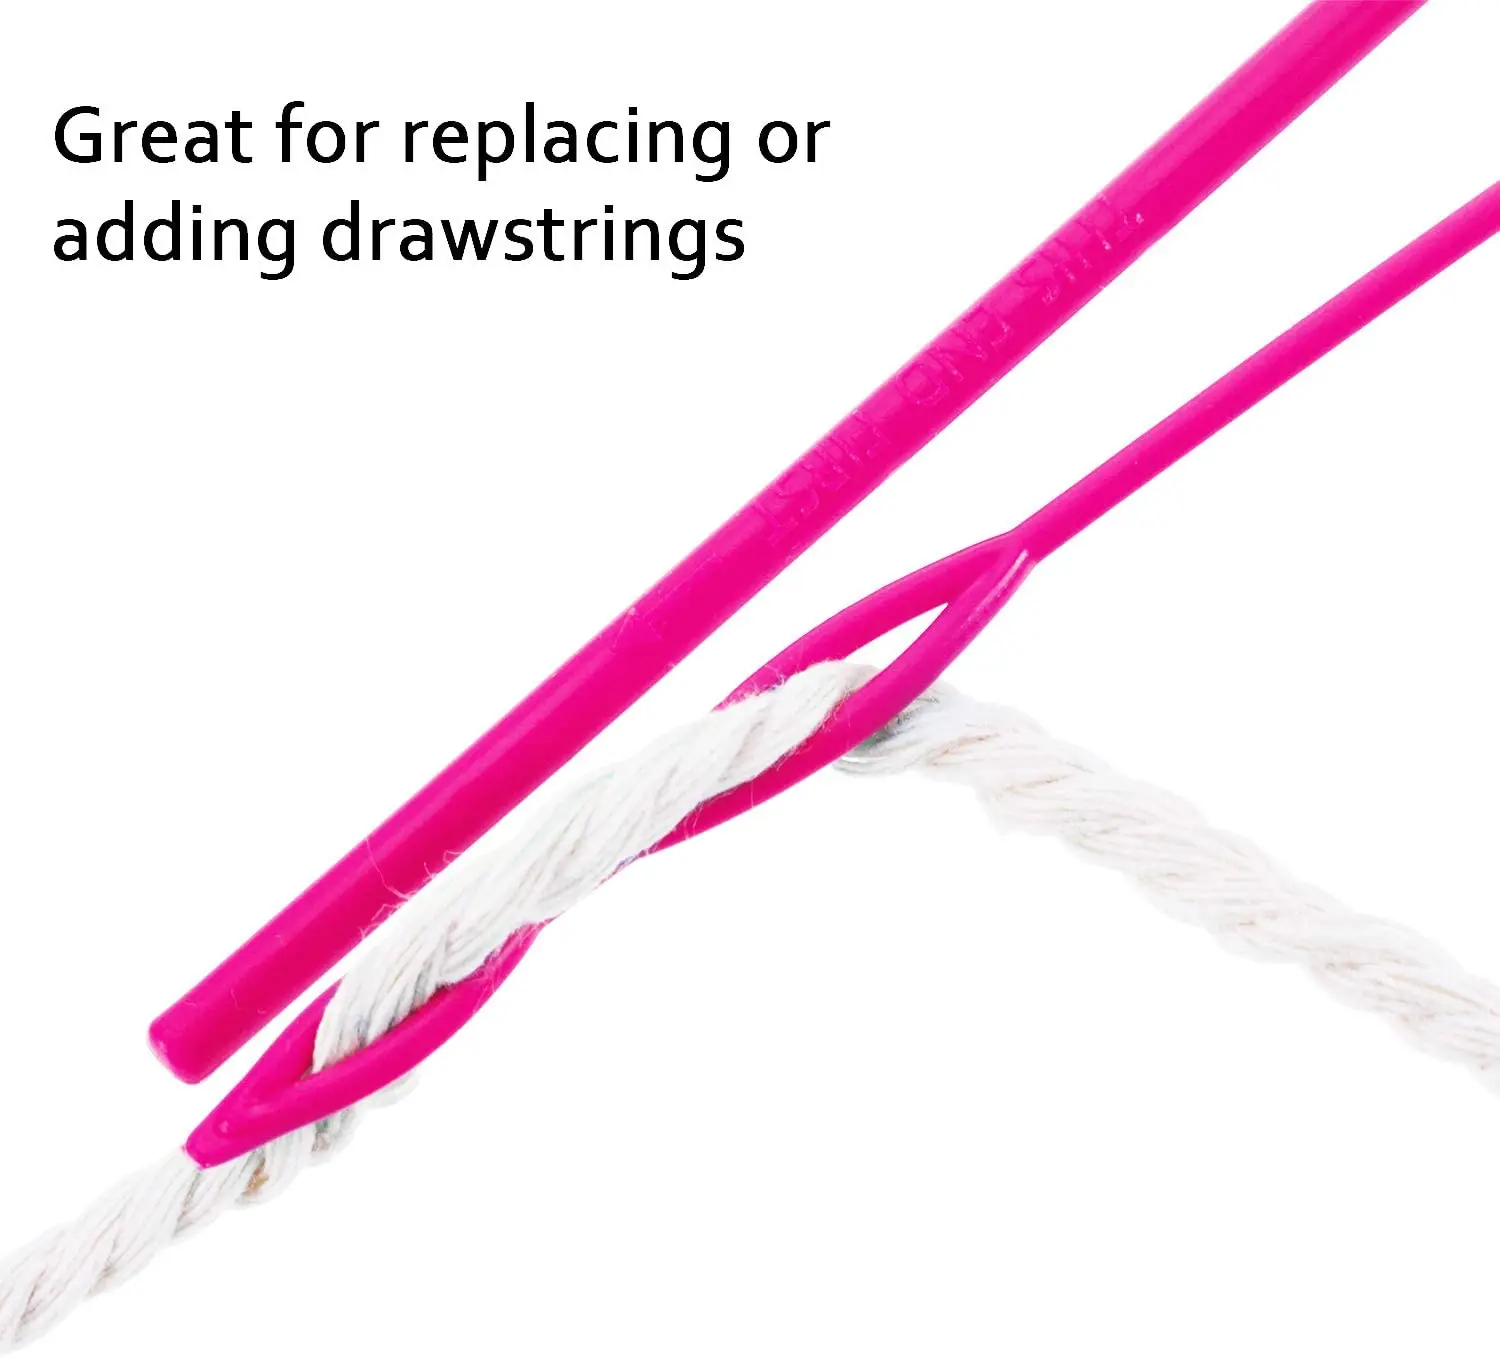 6 Easy Threader Flexible Needle Drawstring Replacement Sewing